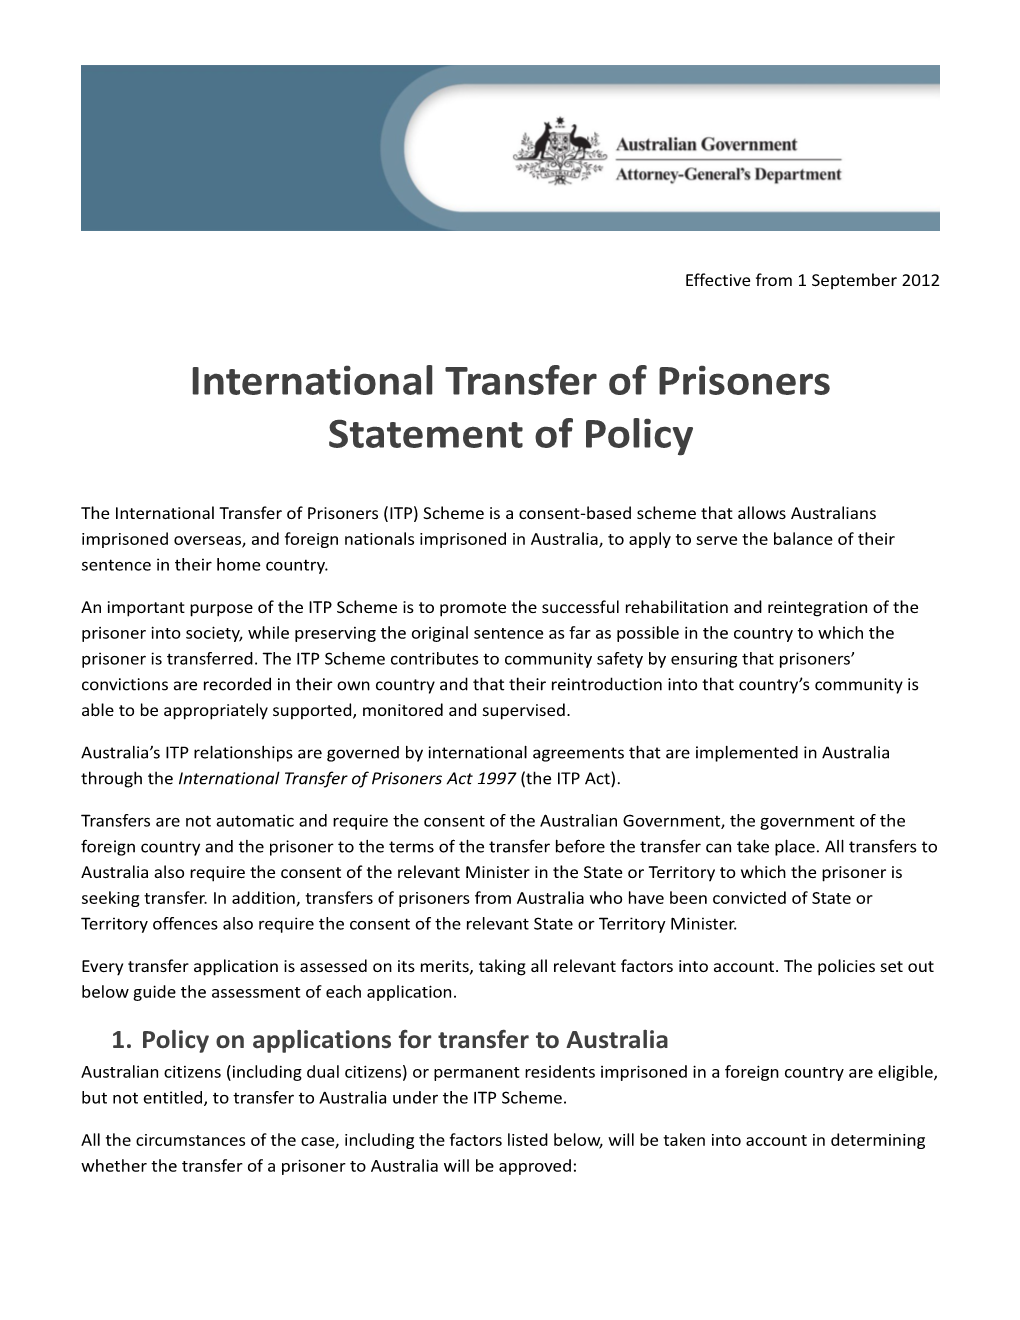 ITP Statement of Policy